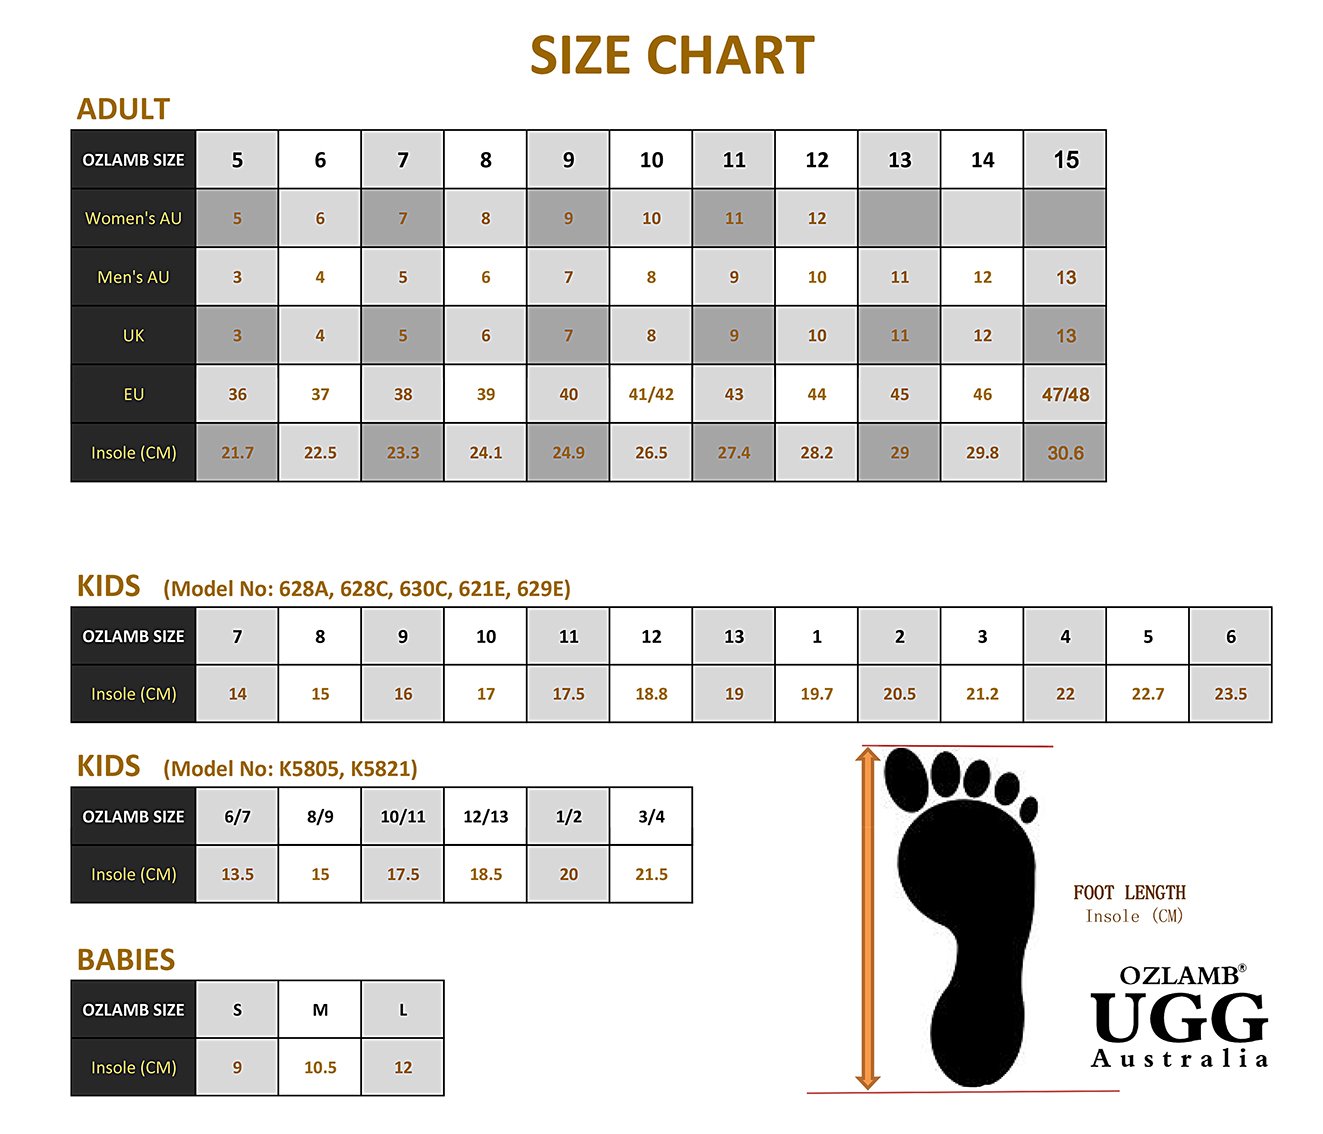 ugg boots size chart